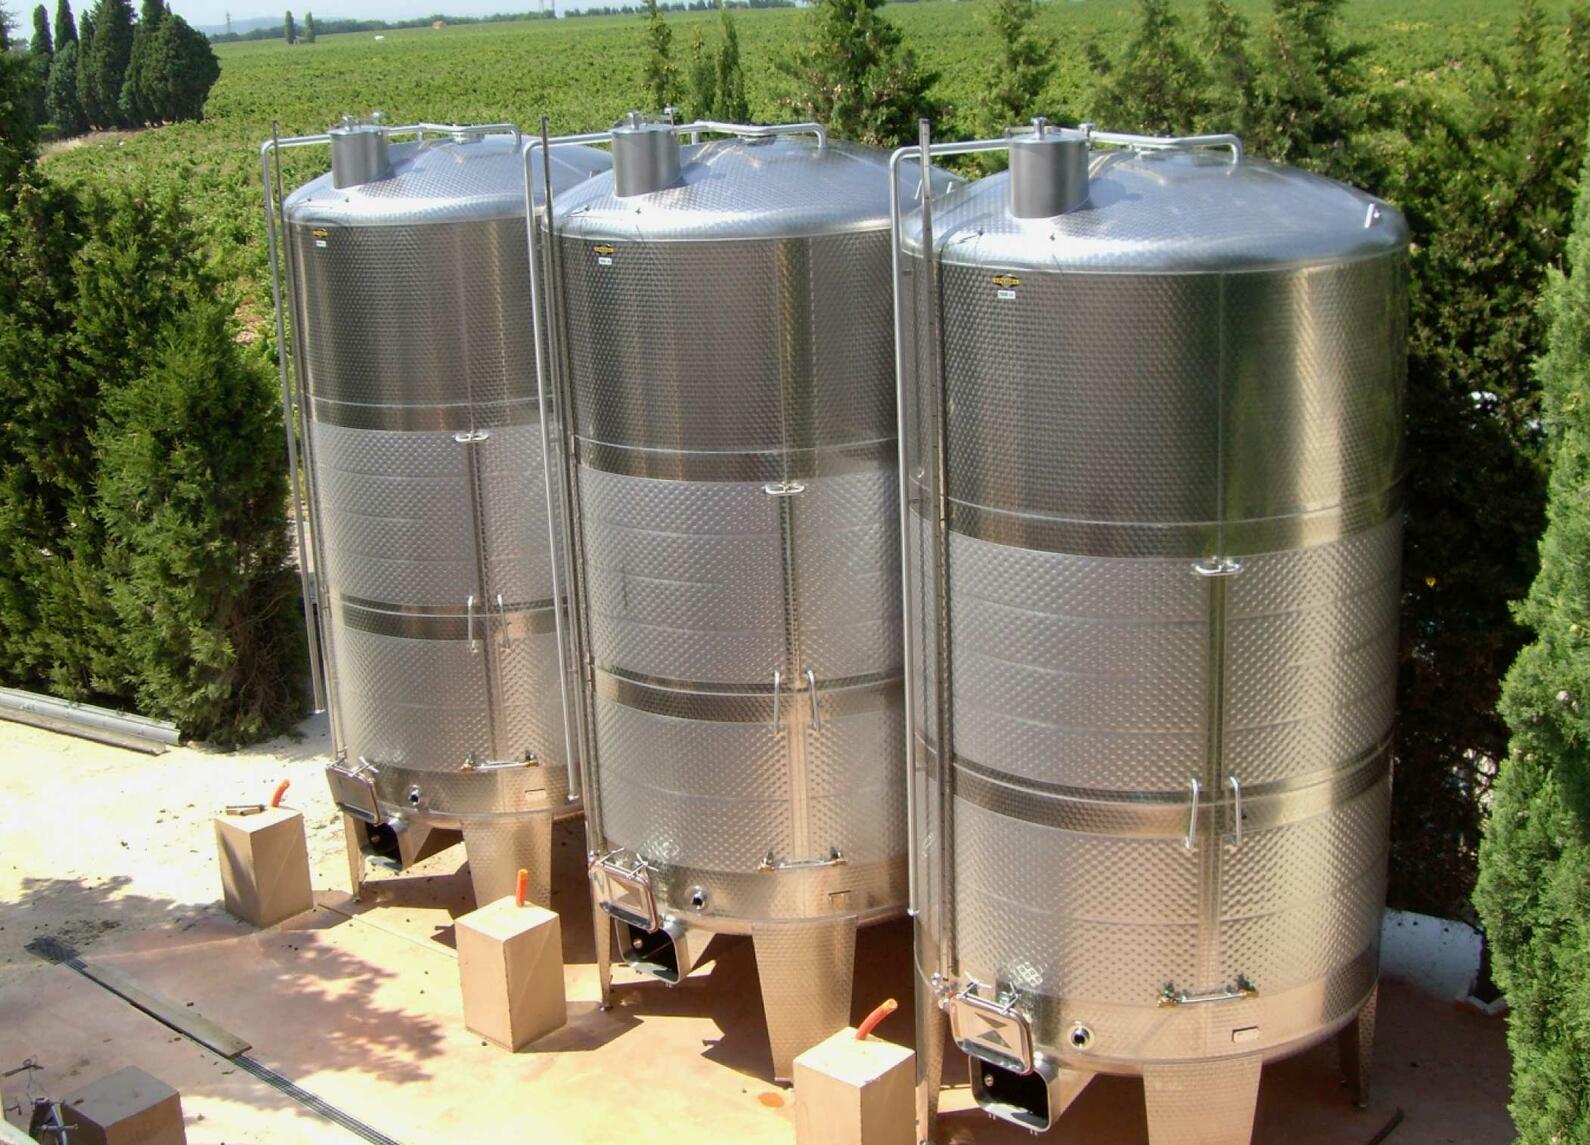 Closed stainless steel tank - Conical base on feet